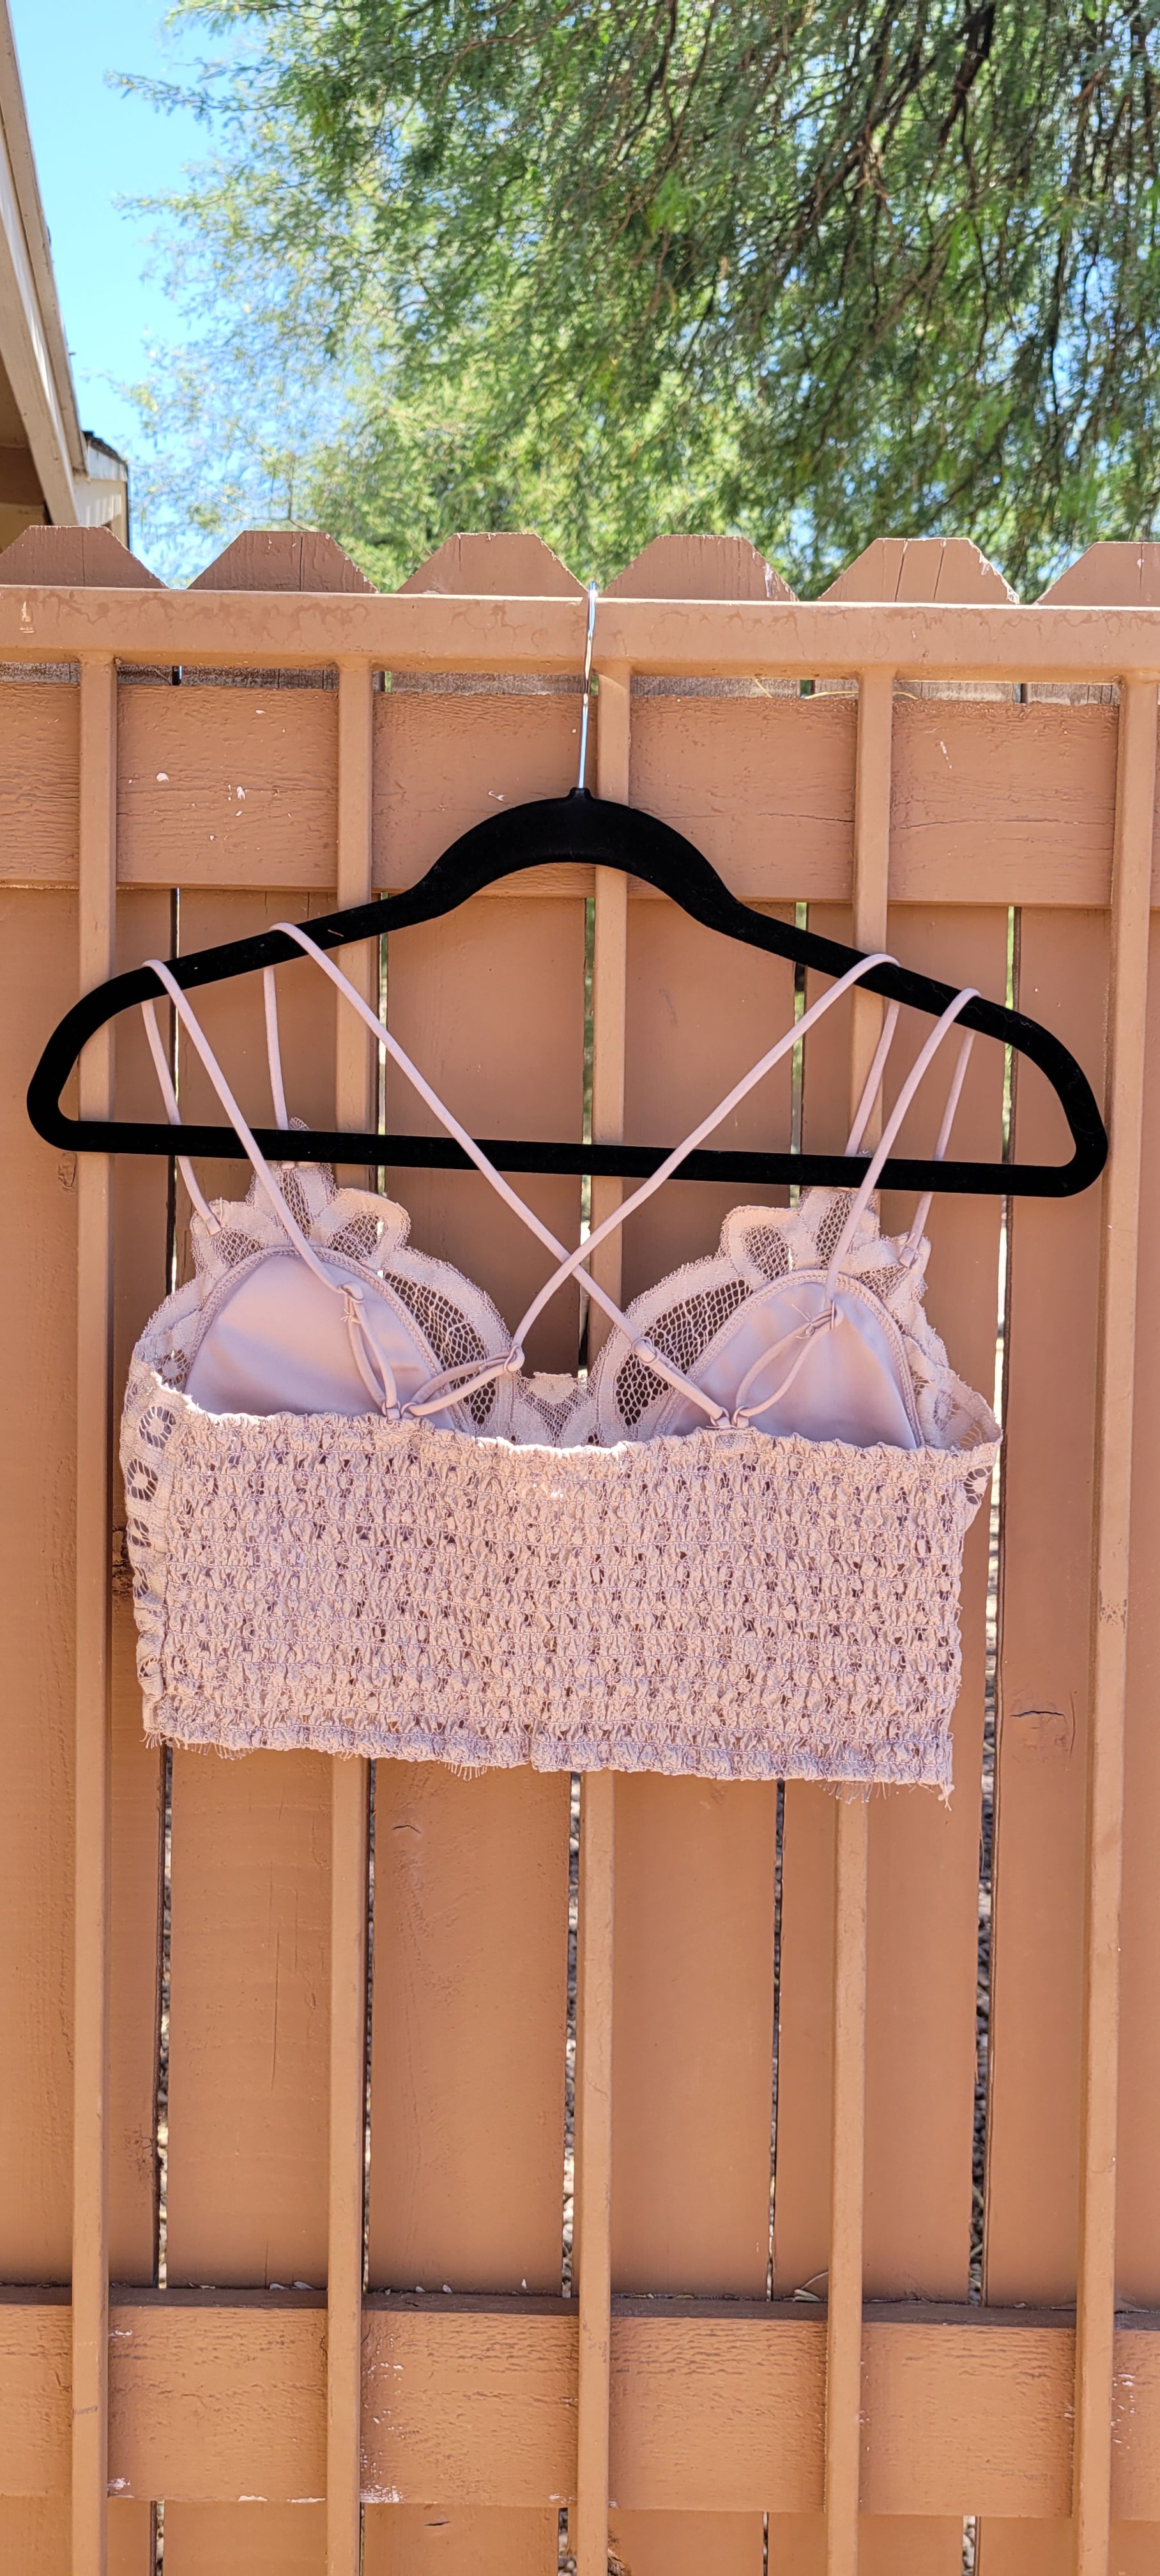 This bralette is a must have staple piece! It is easy for layering or great all by itself! This bralette is super comfy and can easily replace your current bra. No need to worry about clasps, this bralette easily slips over your head. It also features a floral crochet lace, ruched stretchy back, four adjustable straps with crisscross detail in back, and removable bra pads. Color is light mocha. Pair with your favorite jacket or off the shoulder sweater. Don’t be afraid to get creative!